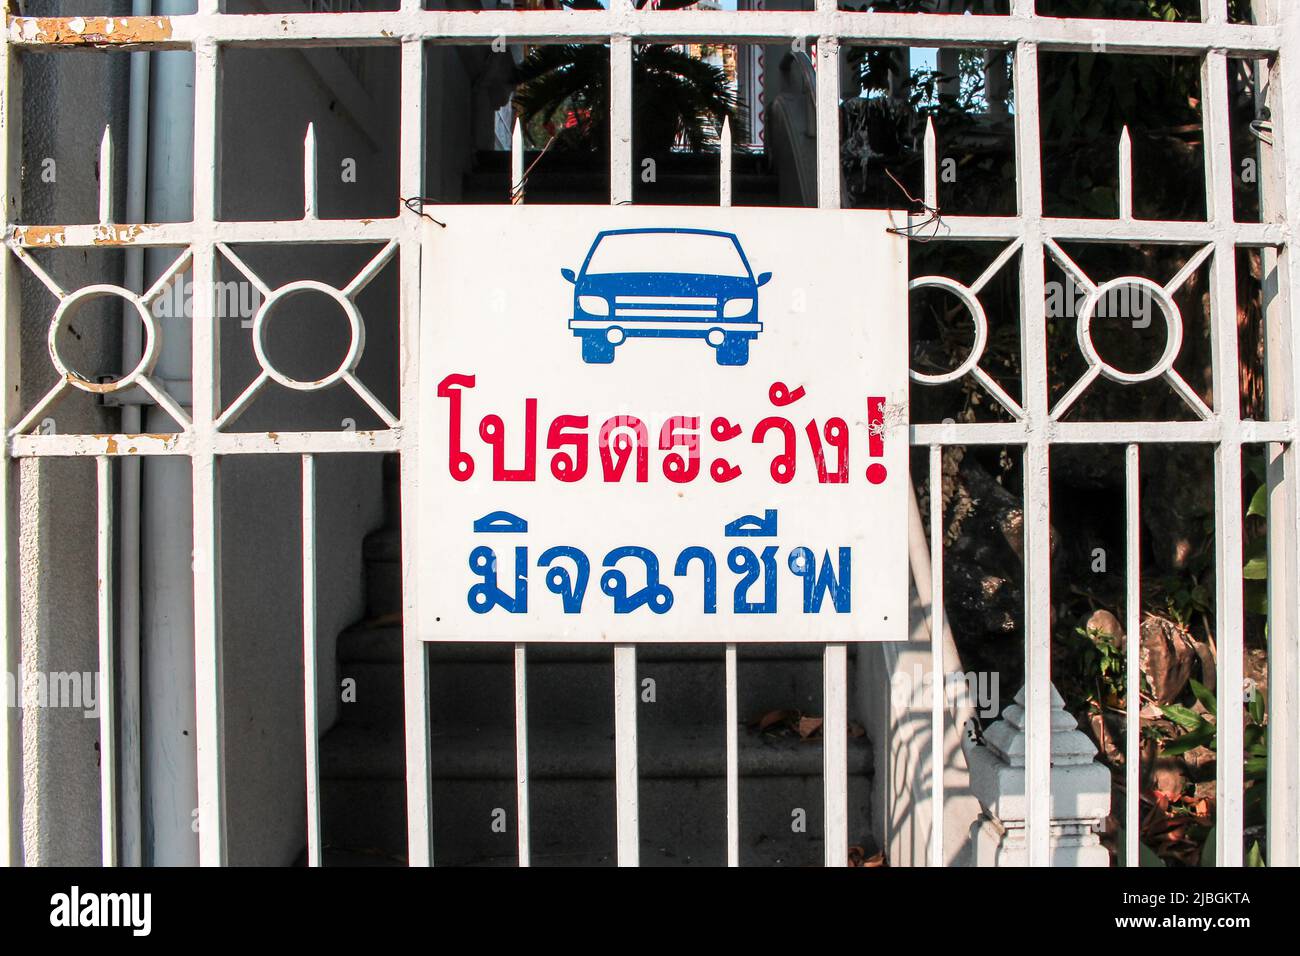 The image of warn car sign in Thai hanged on the gate in the site of building. Translation : please be careful of criminal. Stock Photo